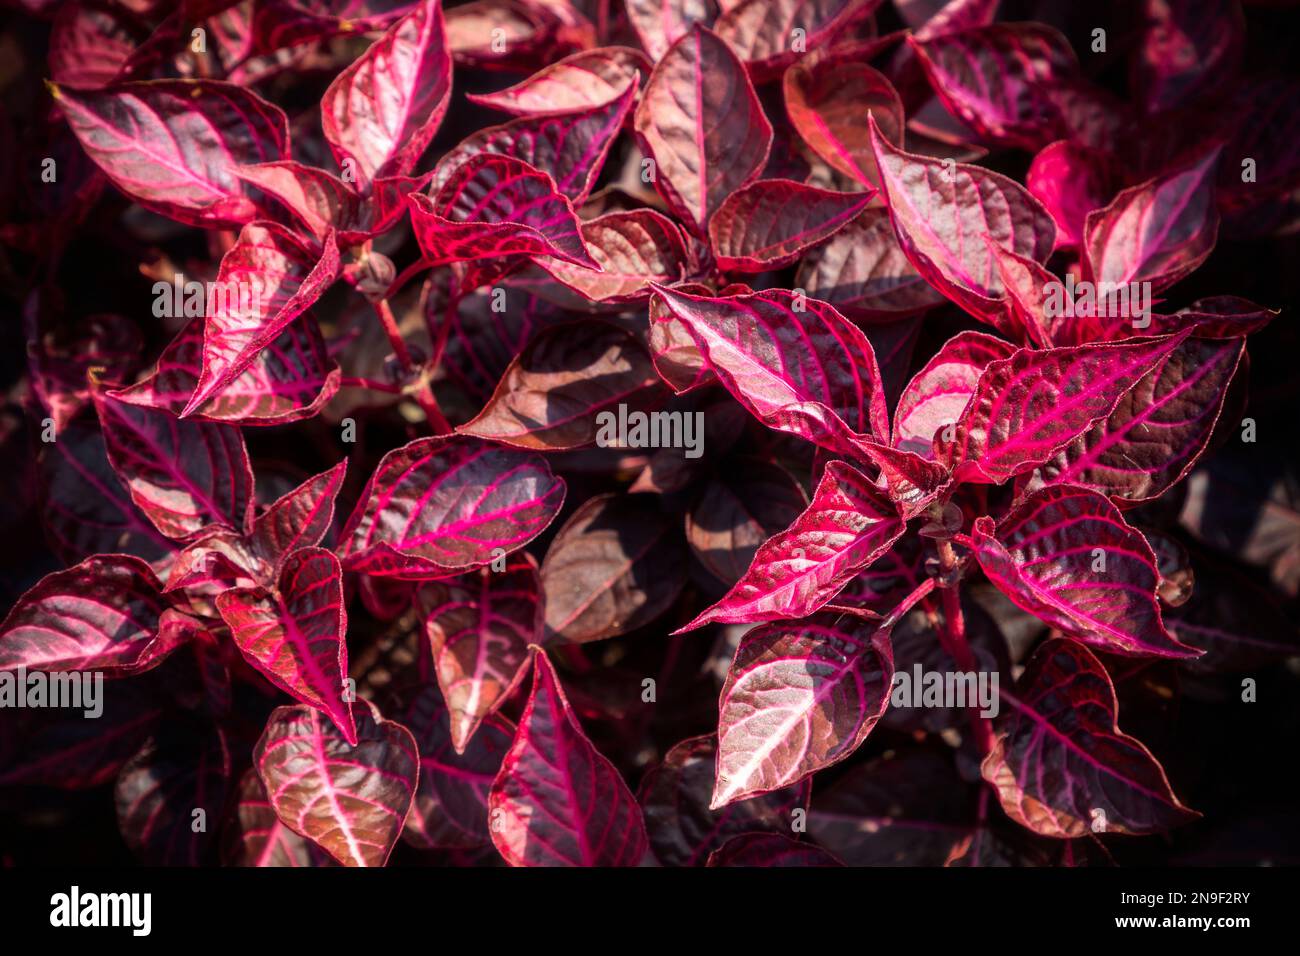 close up of red and purple leaves of iresine herbstii or bloodleaf plant in sunshine Stock Photo